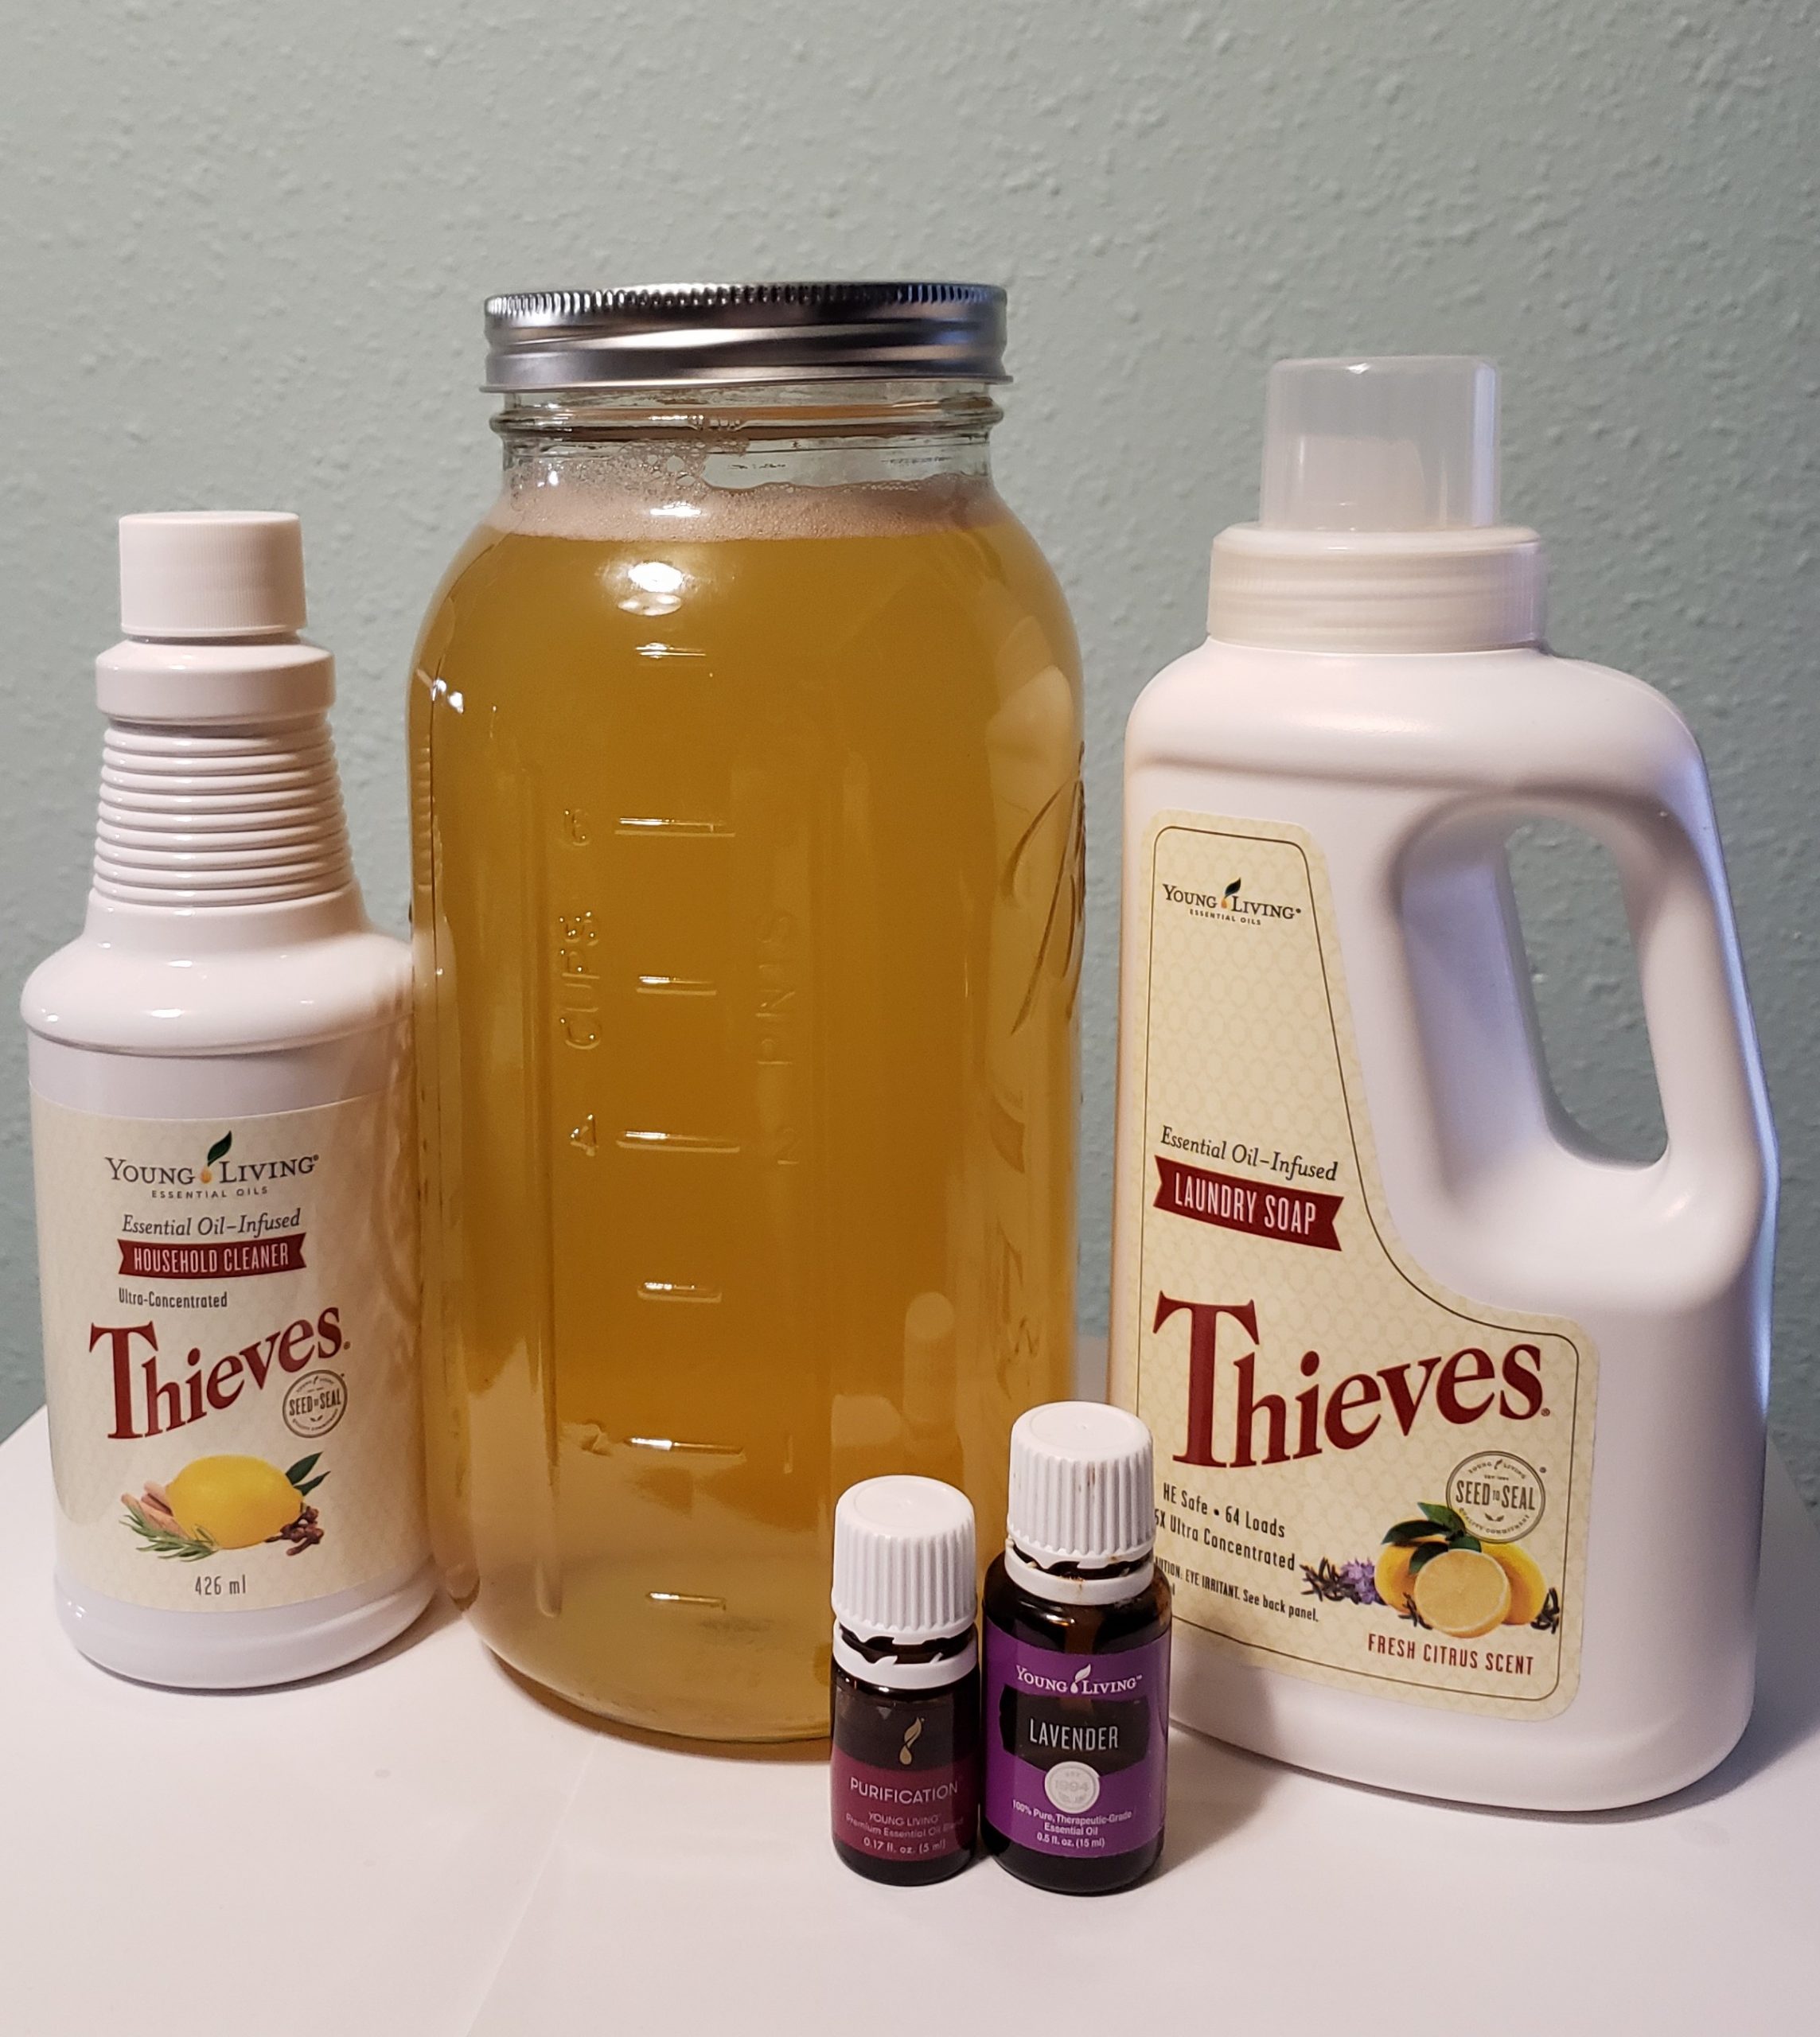 young living thieves household cleaner next to glass jar filled with amber fluid and lid on next to thieves laundry soap and purification blend and lavender essential oil